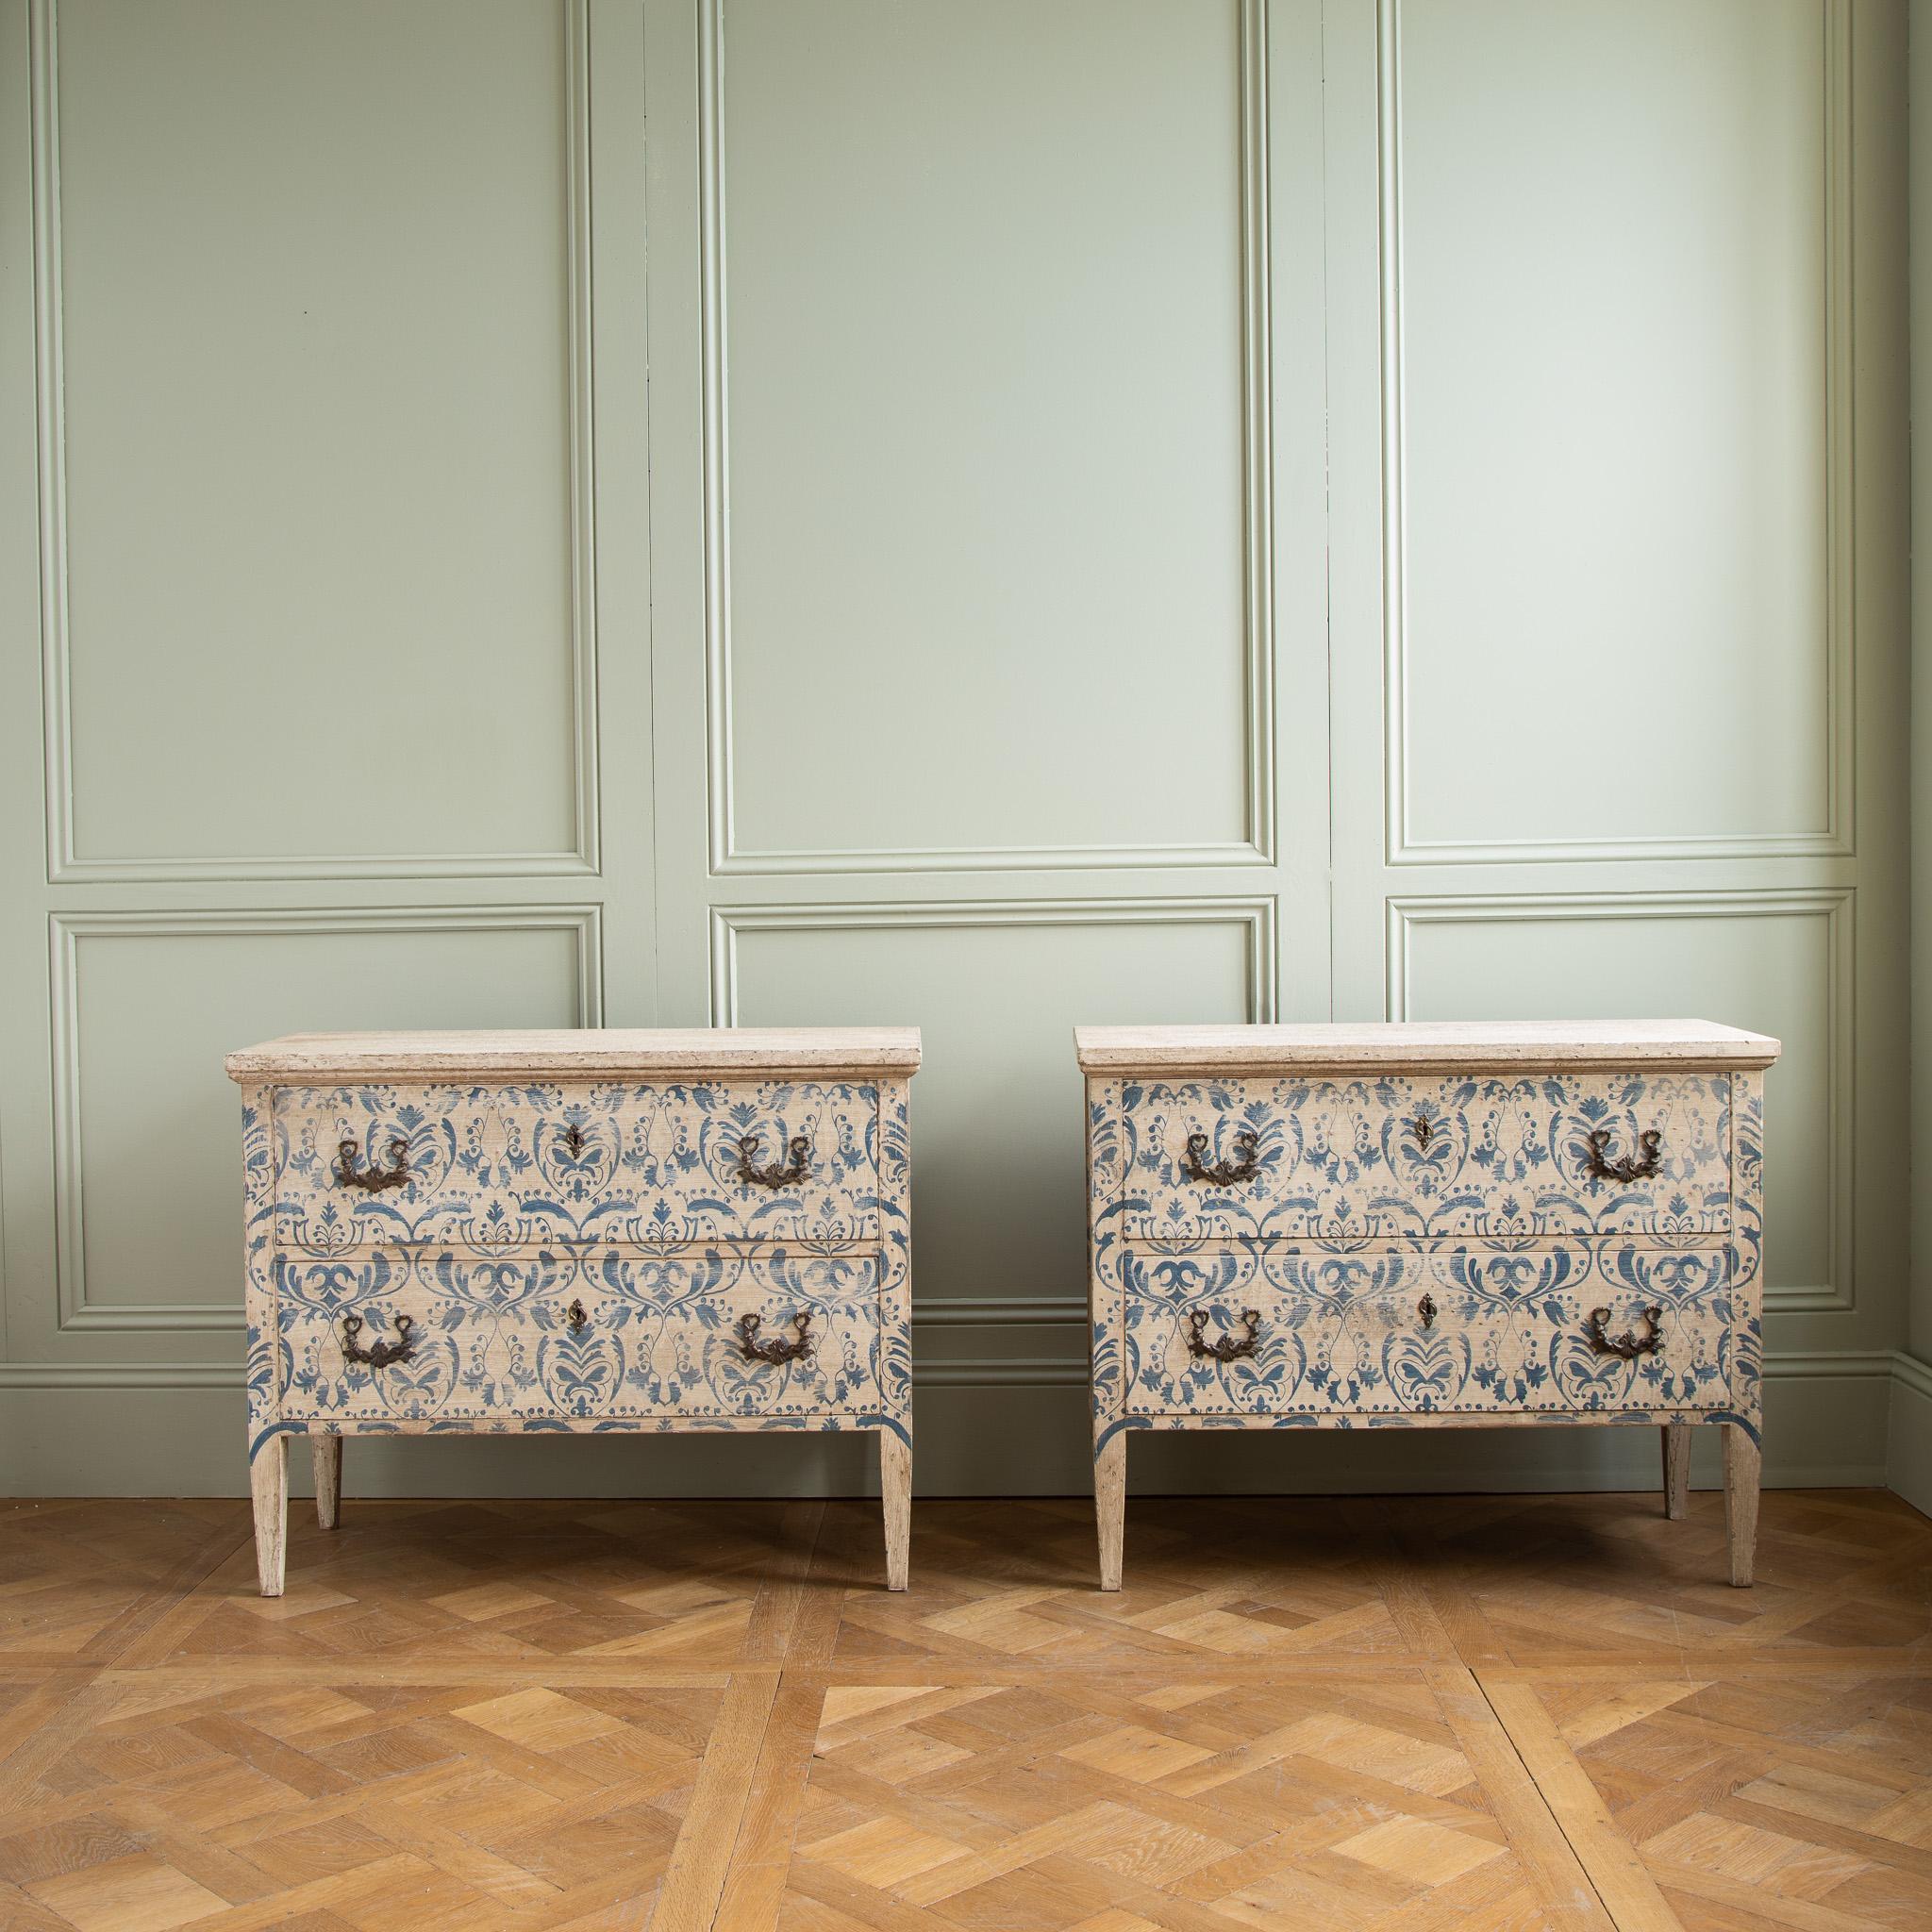 A vivid pair of Italian chests of drawers, hand painted in the traditional Florentine style featuring an aged Indigo Blue, flora and foliage motif on a background of antique white. The motif covers the front and both sides of the body. The paint